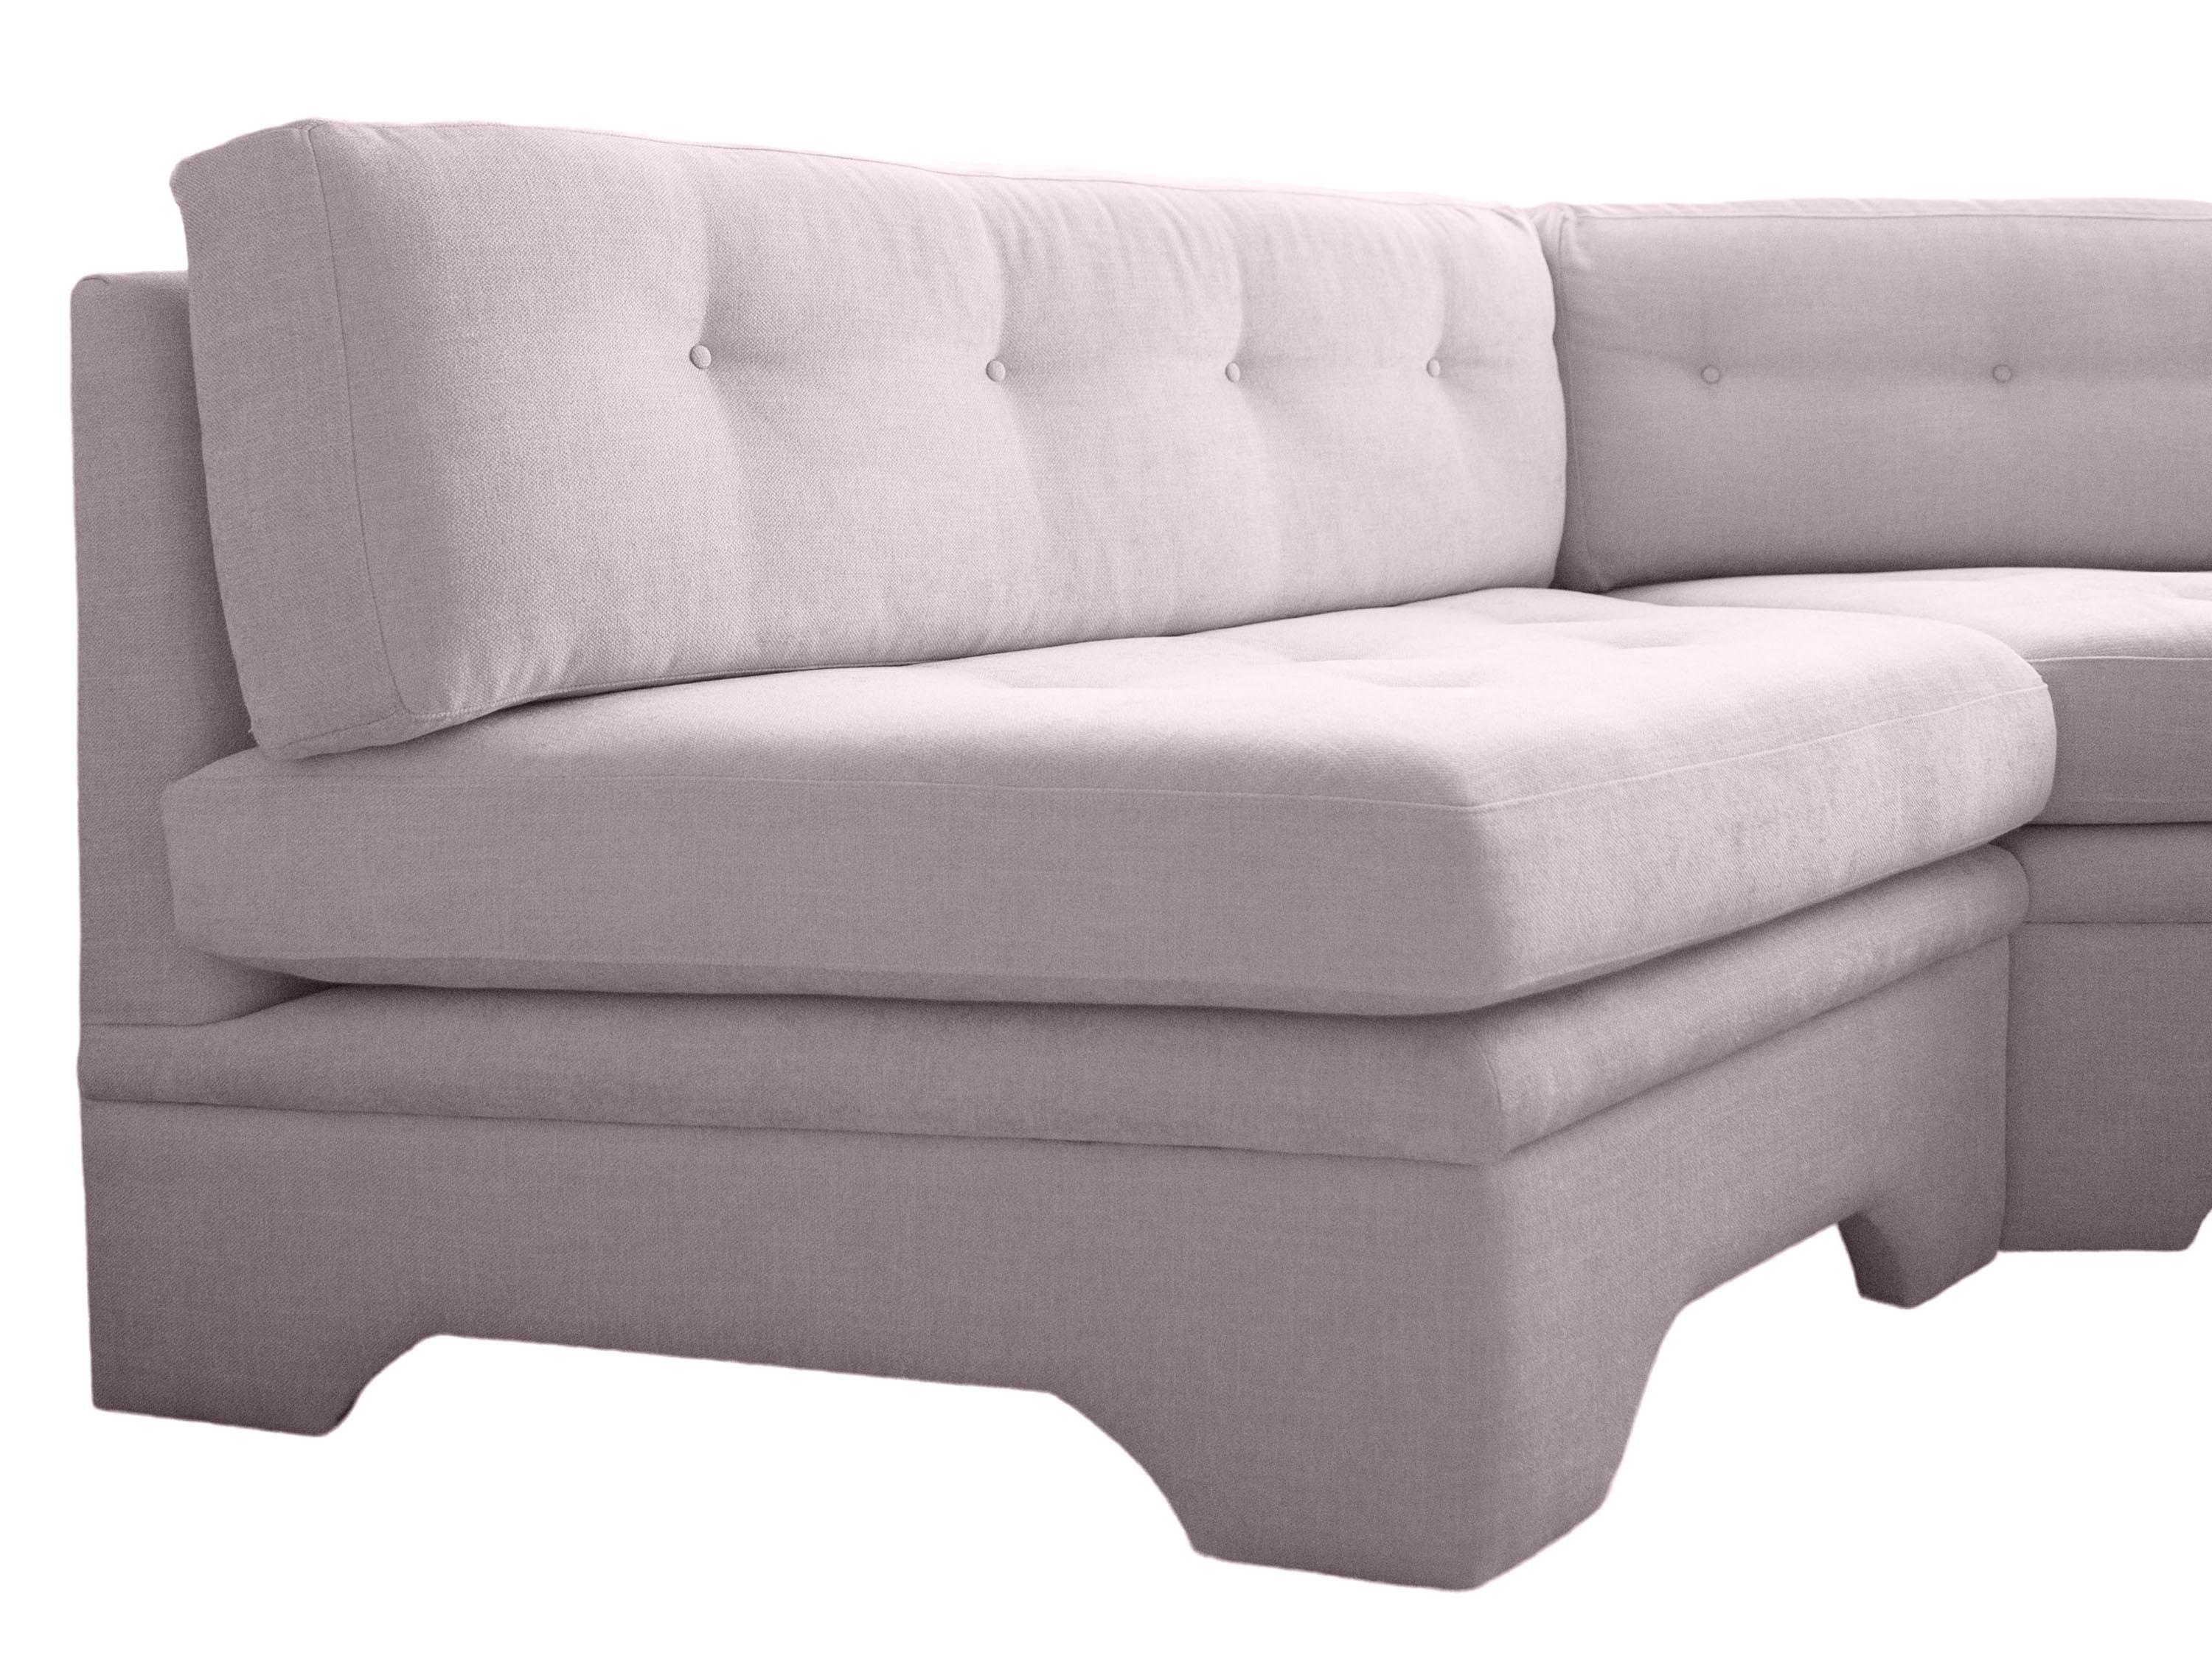 curved banquette sofa